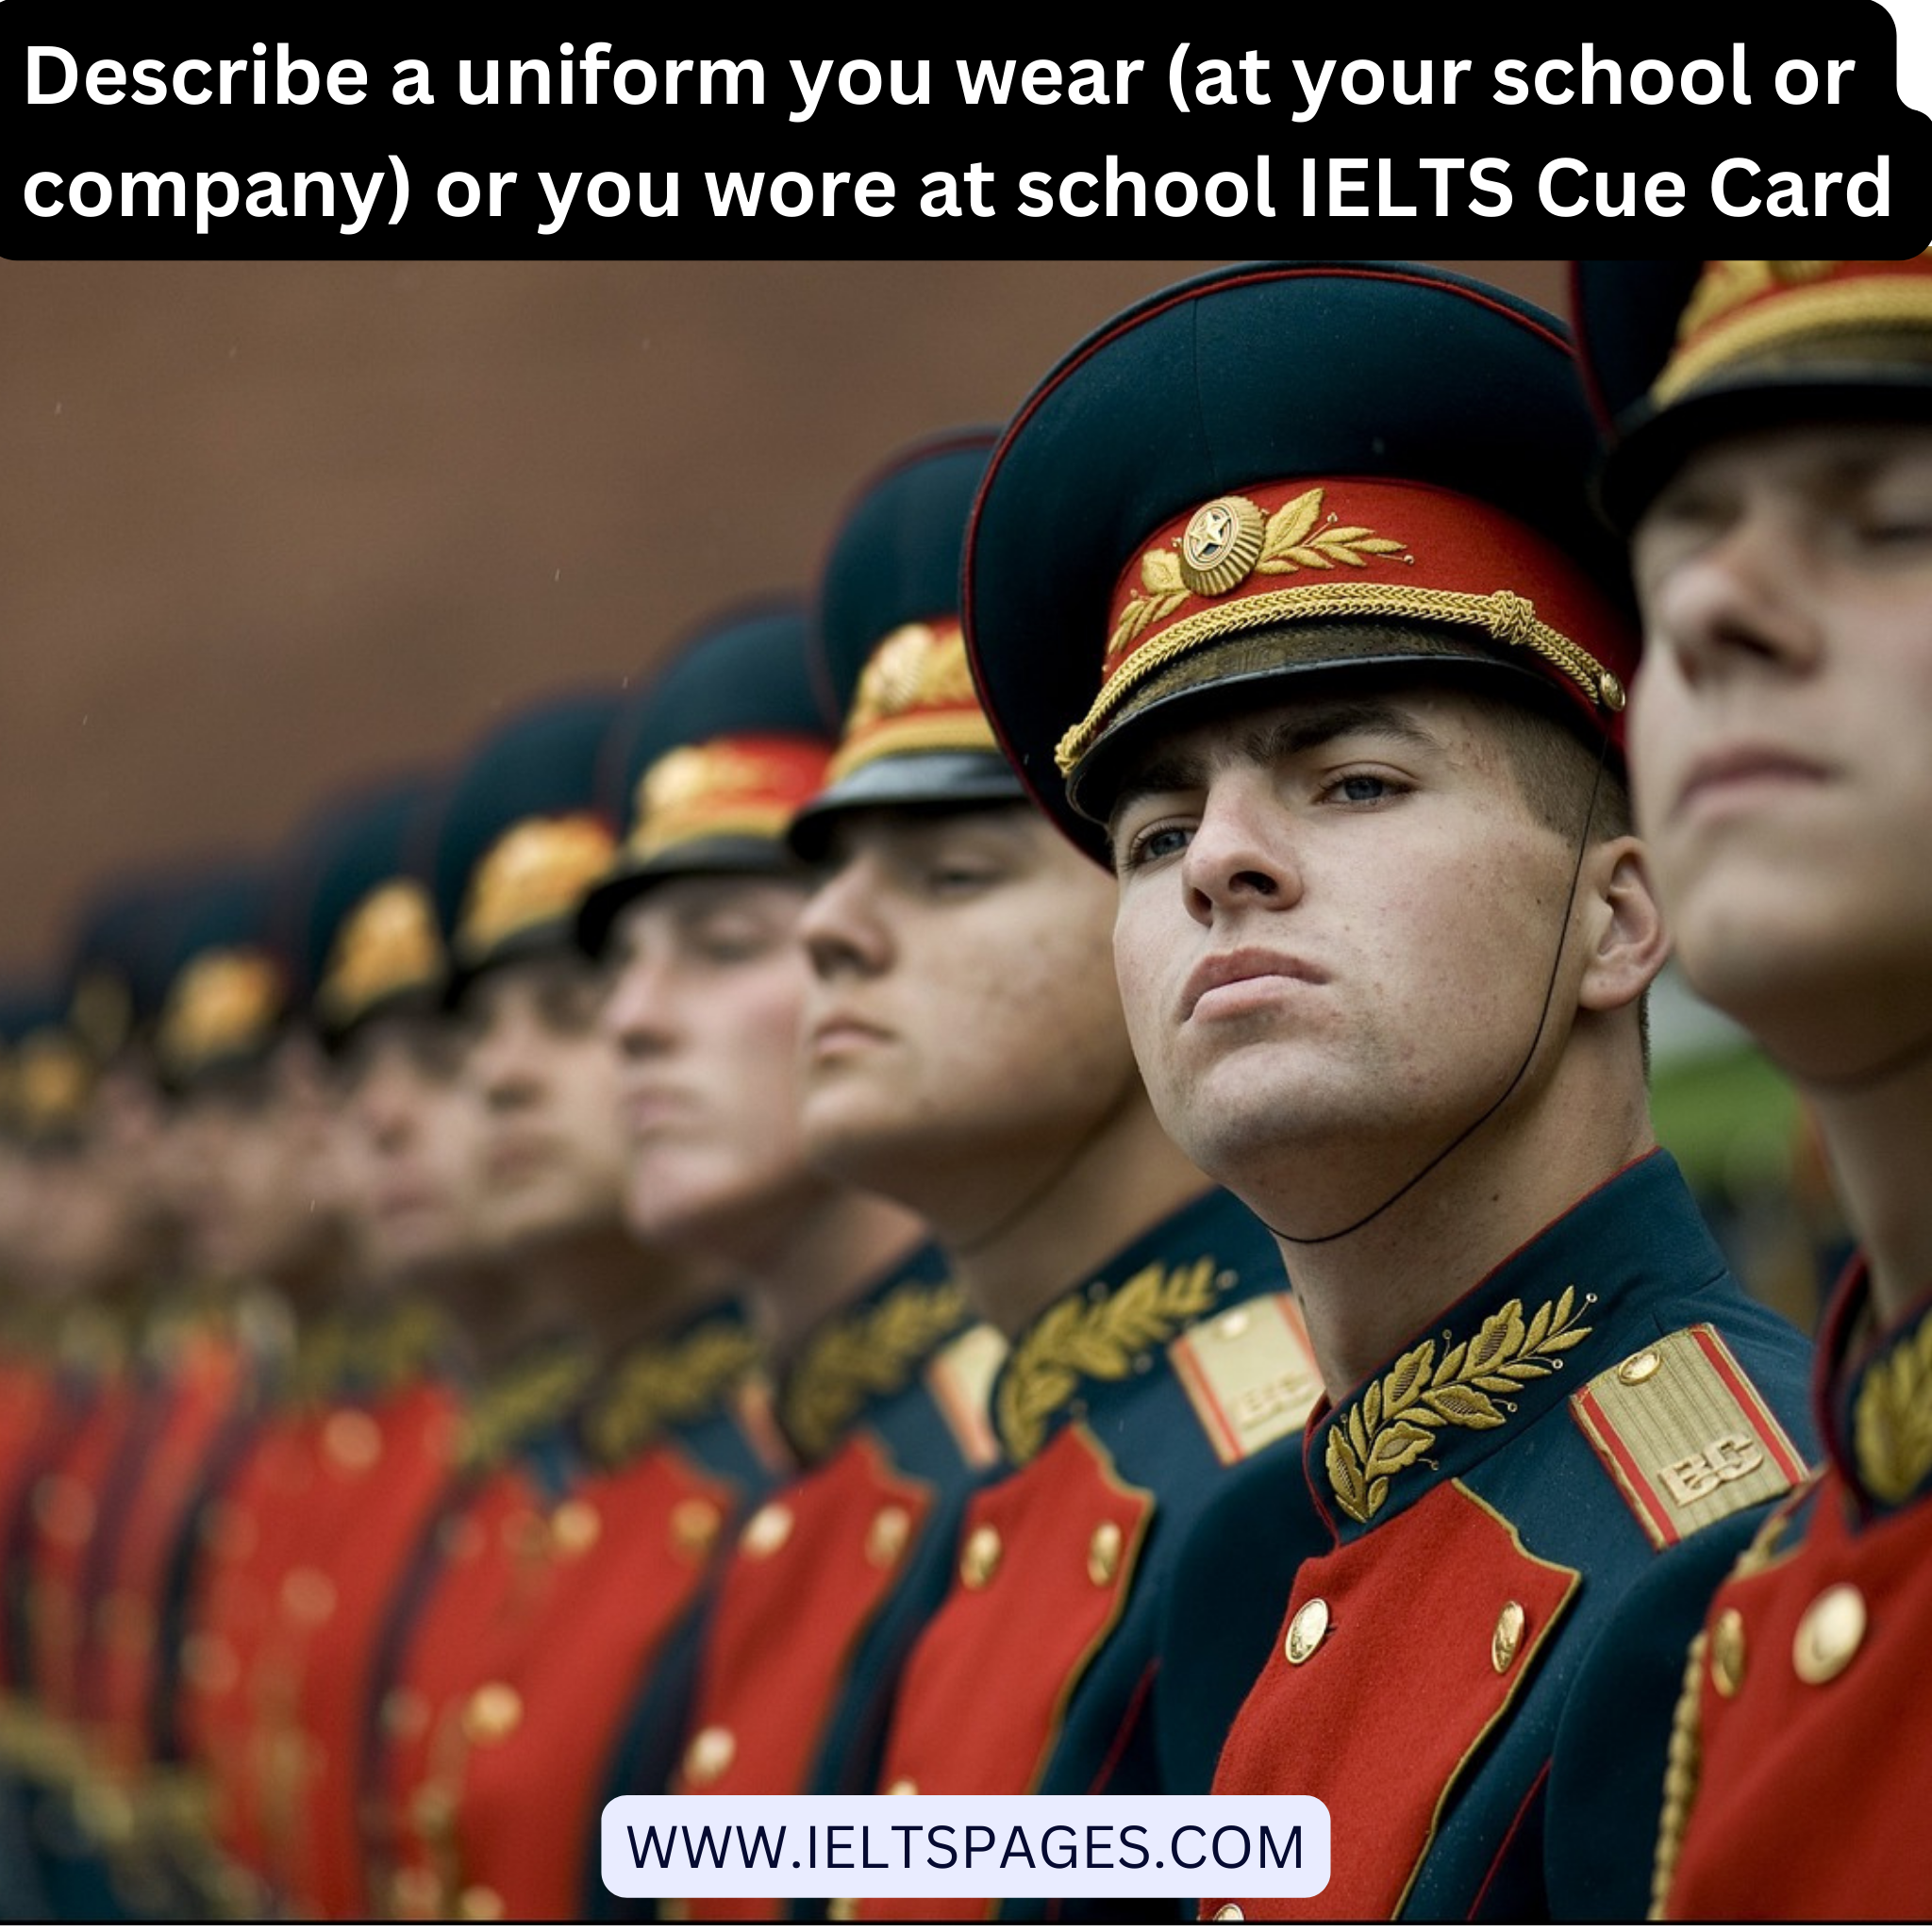 Describe a uniform you wear (at your school or company) or you wore at school IELTS Cue Card